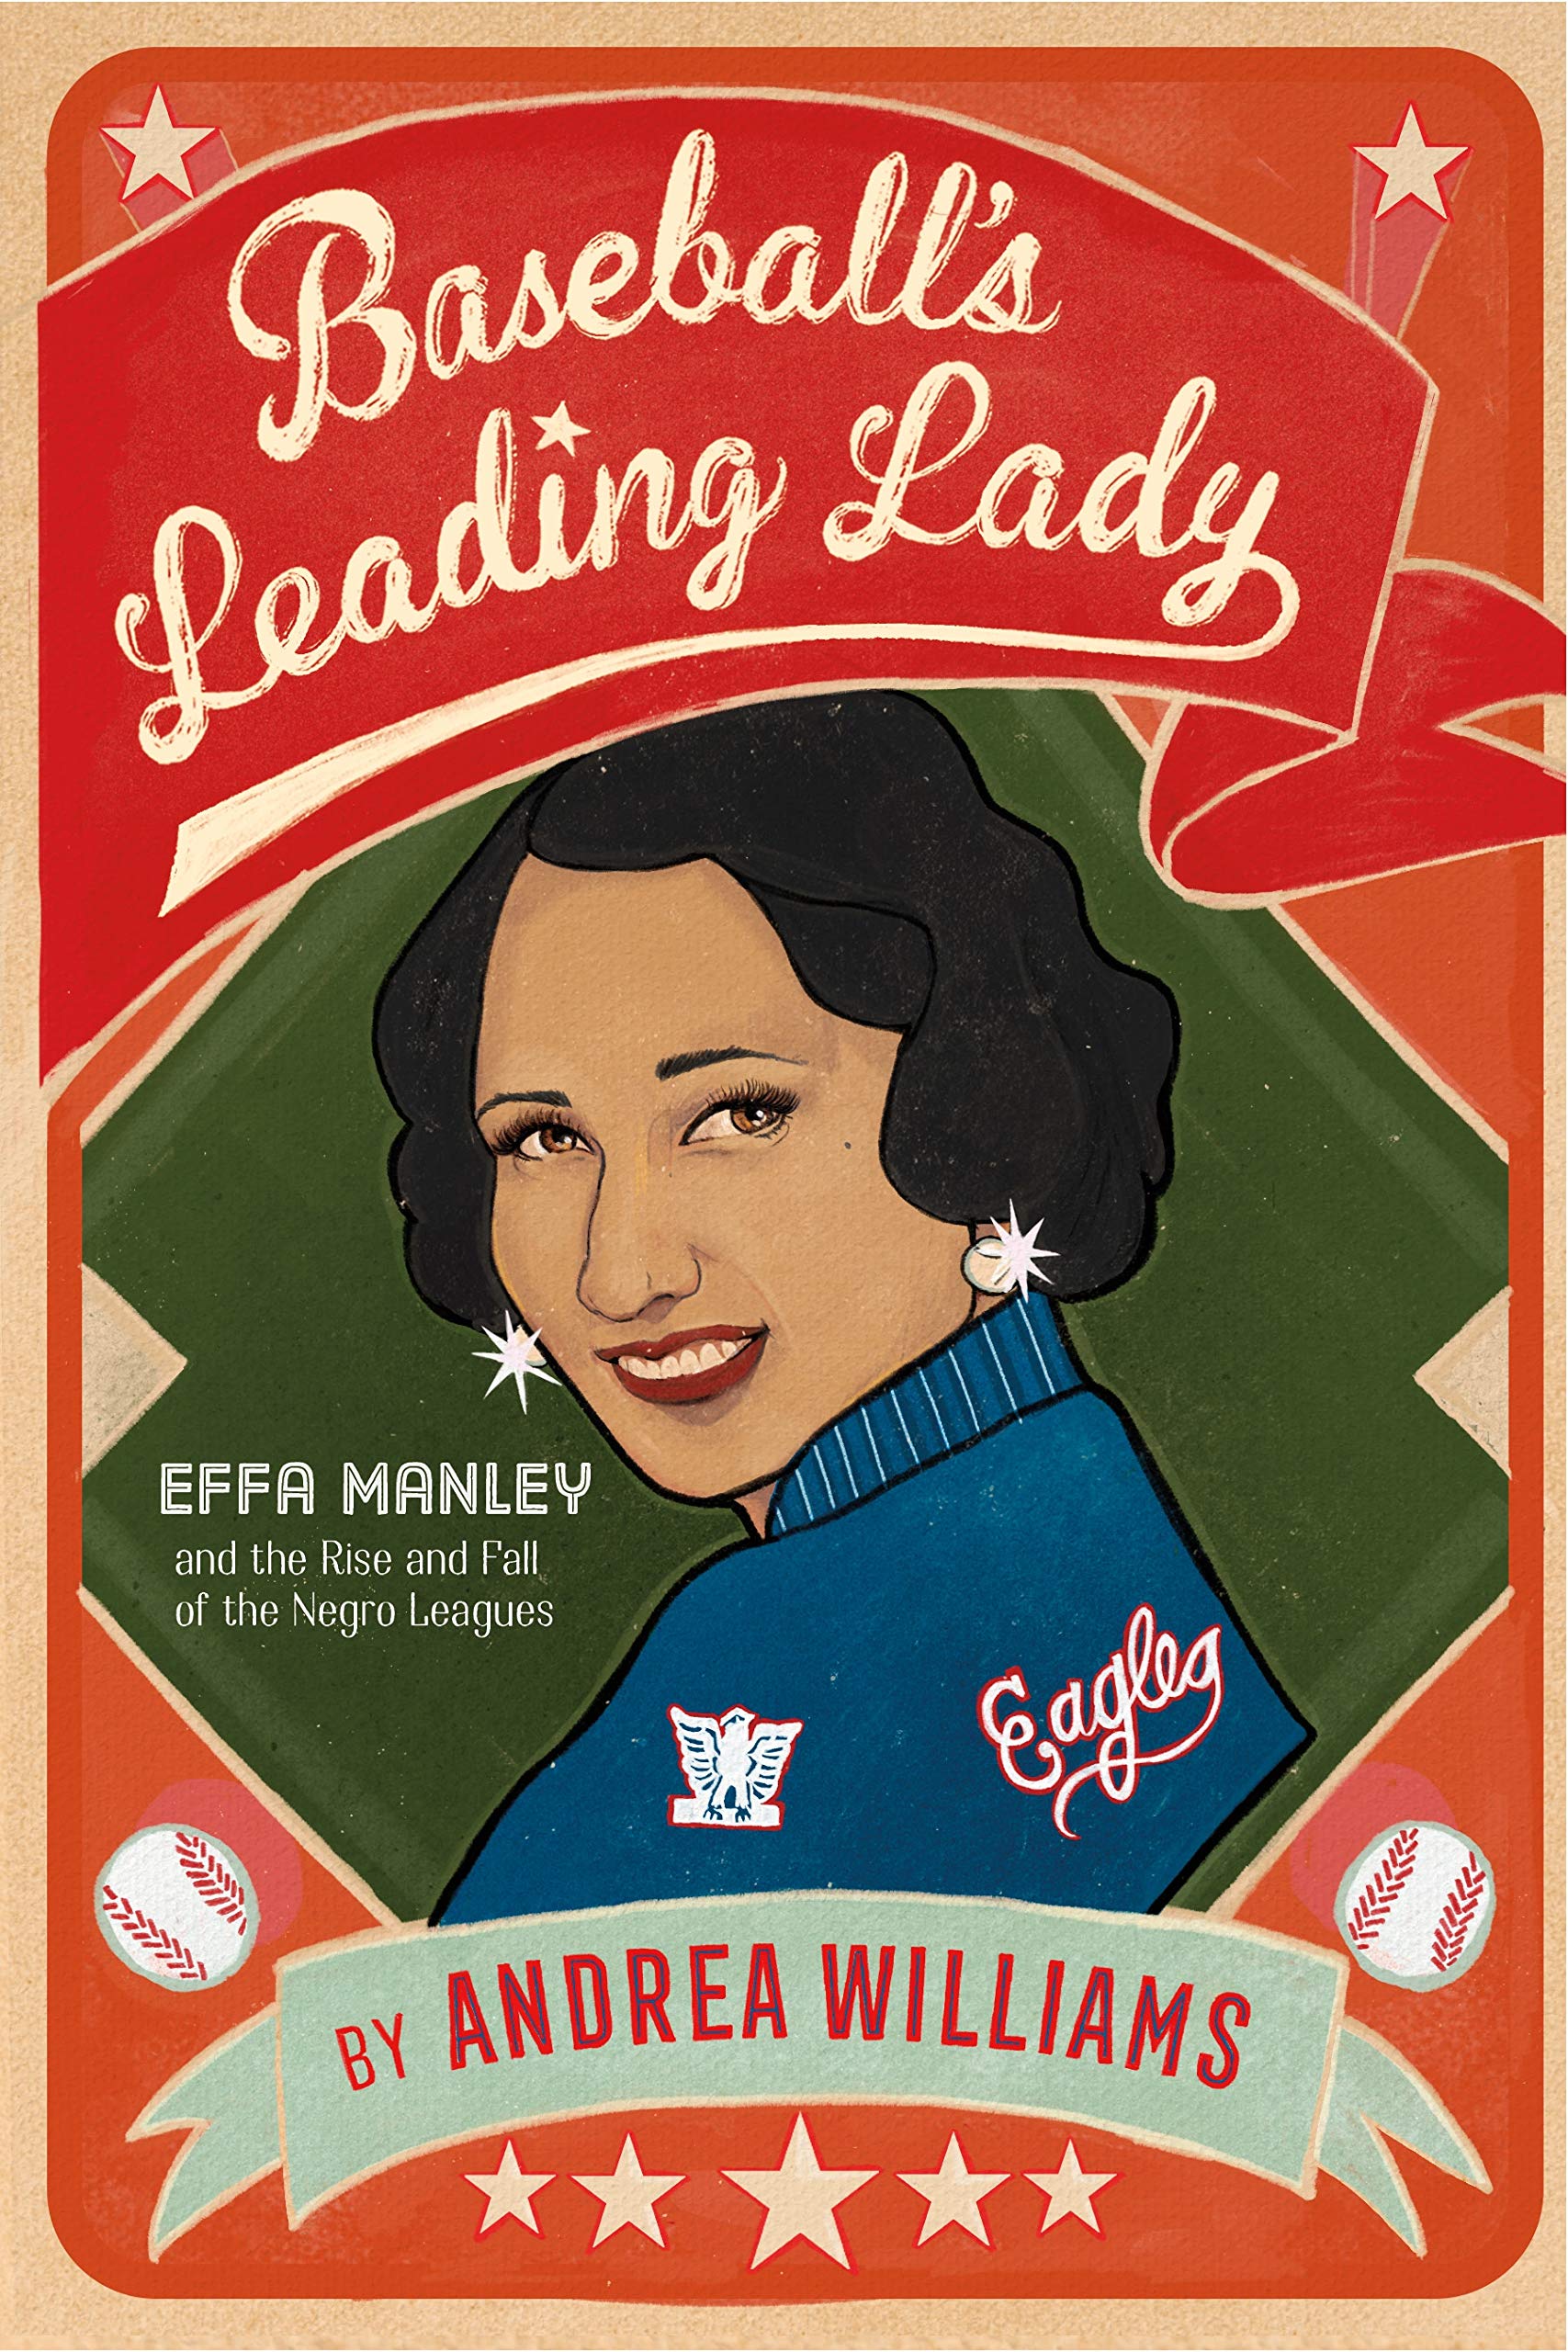 Baseball's Leading Lady: Effa Manley and the Rise and Fall of Negro Leagues